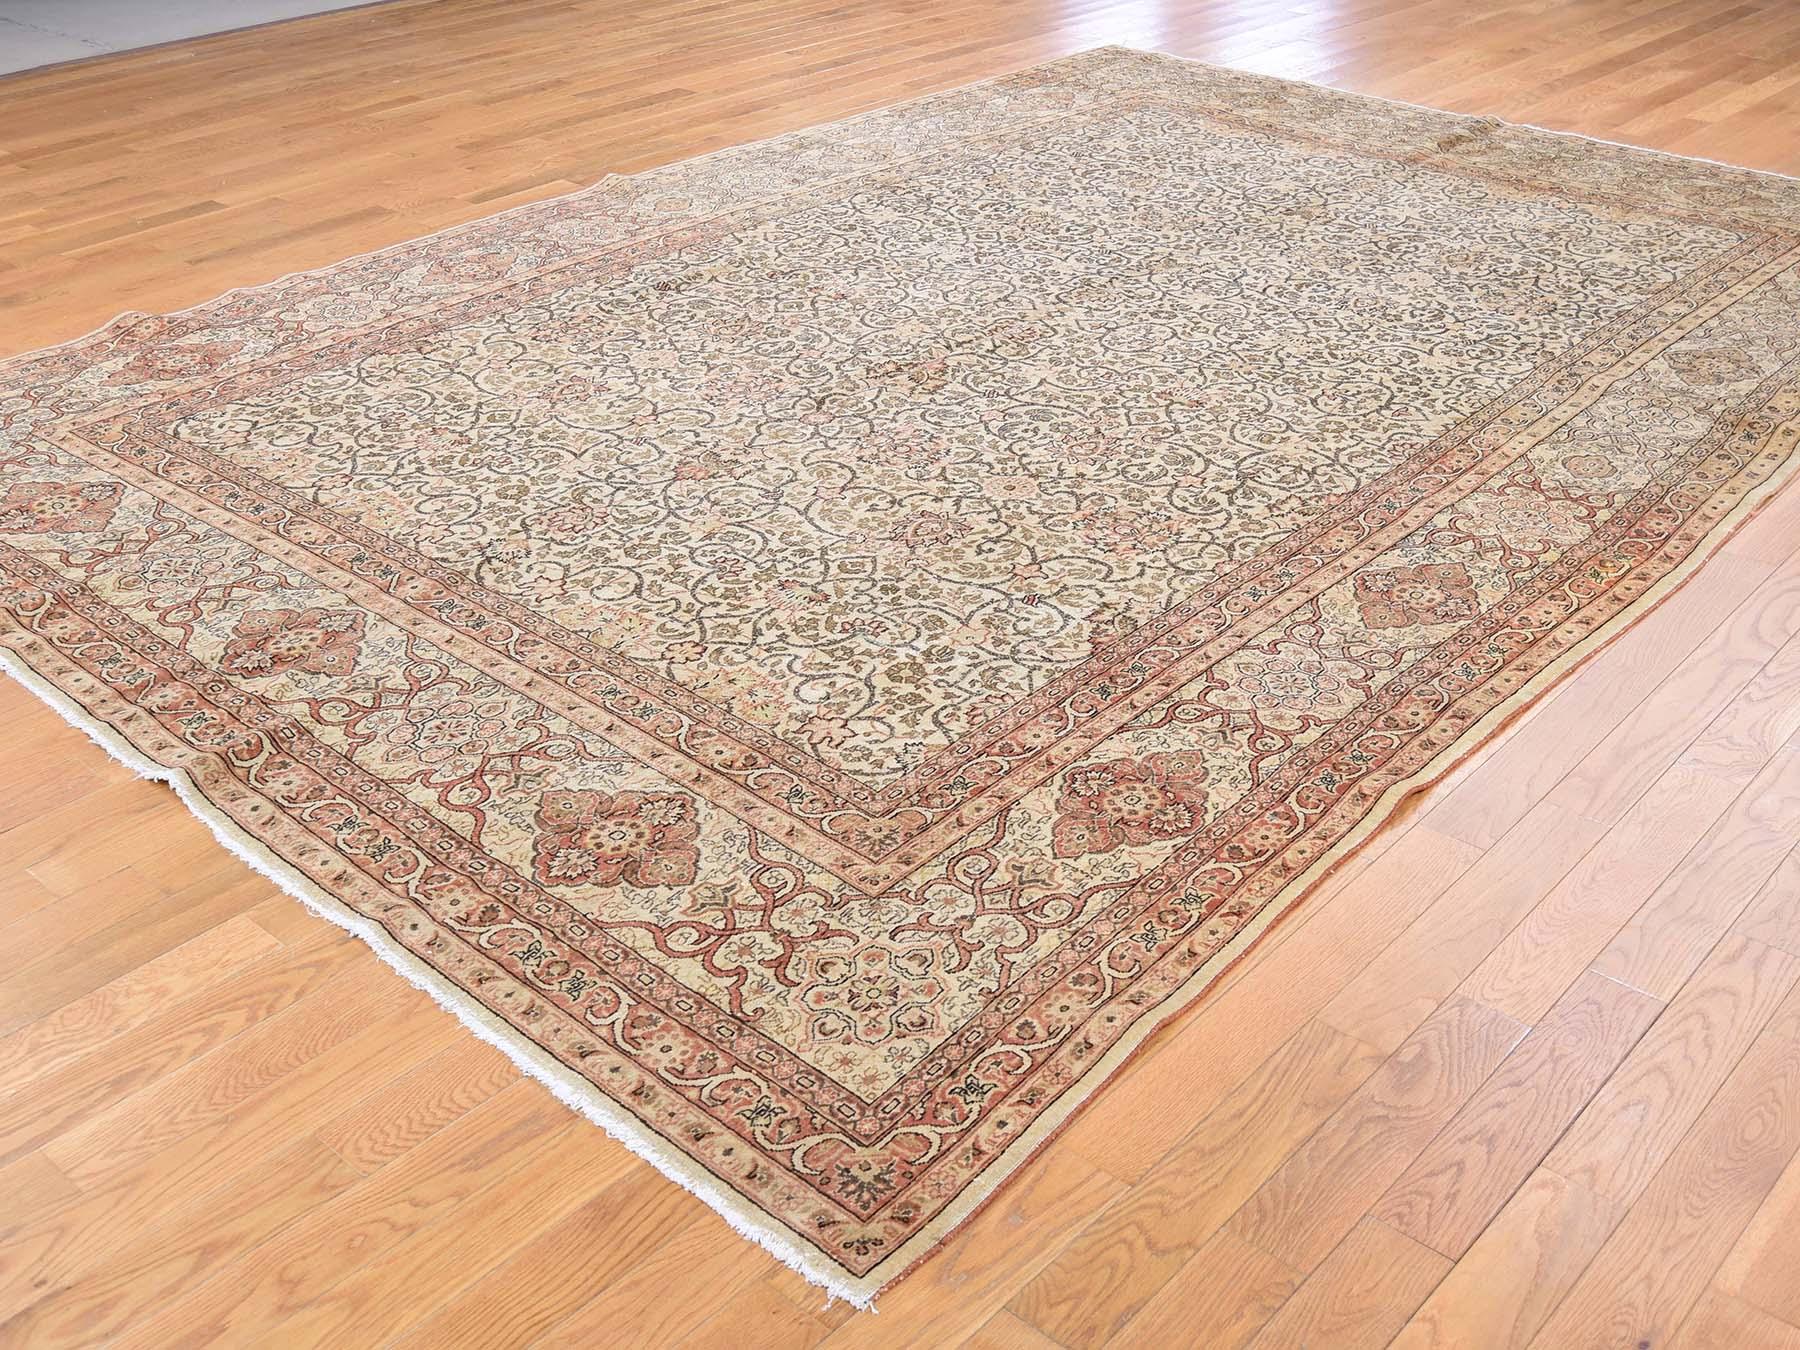 1920 Vintage Persian Tabriz Hand-Knotted Wool Full Pile Rug  1